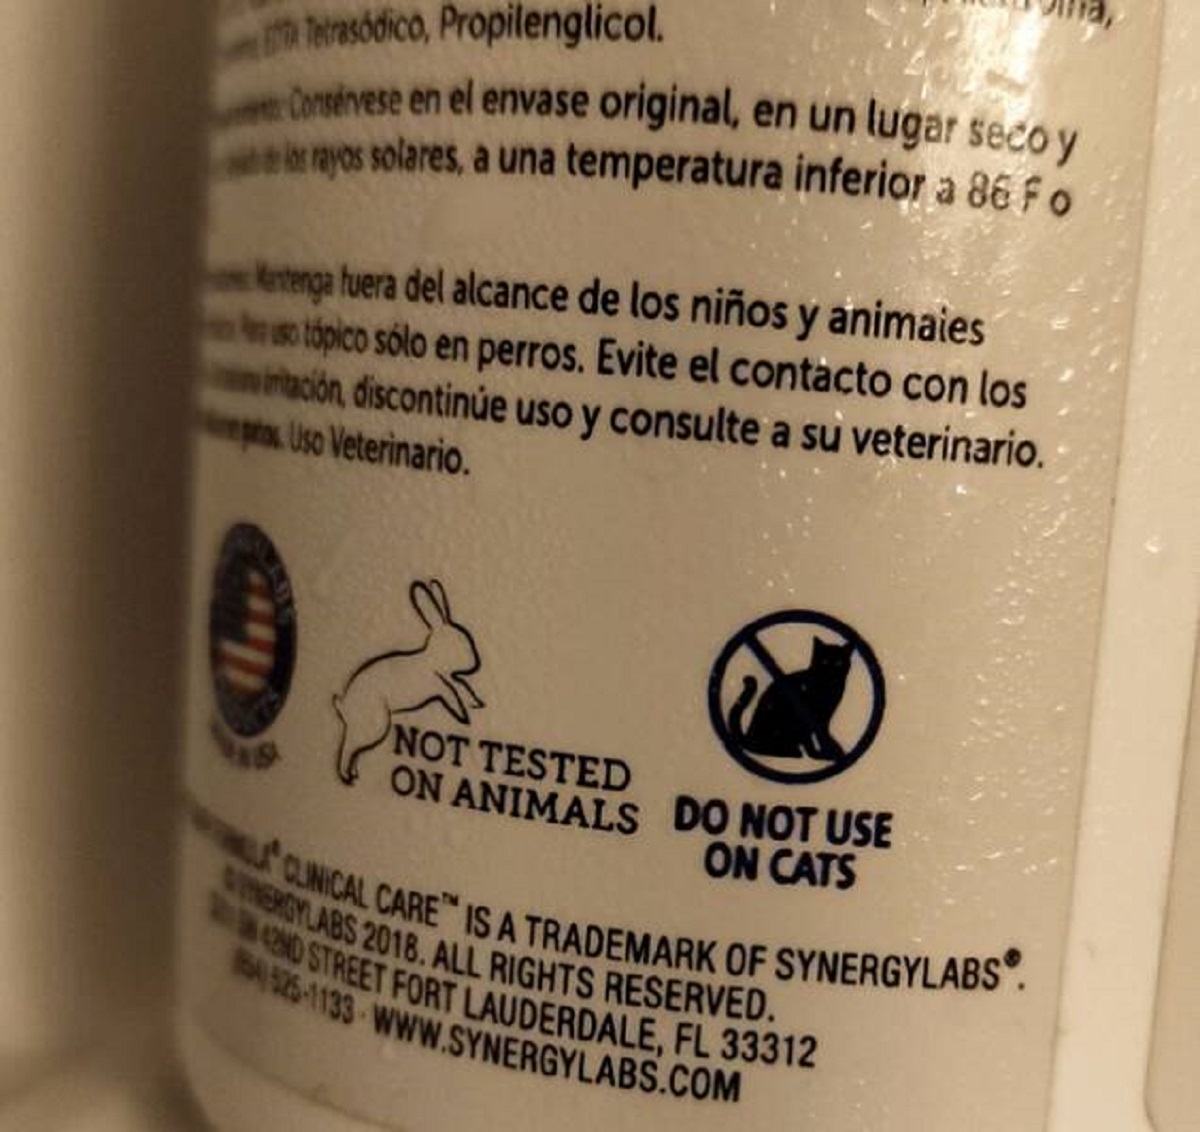 "My dog's shampoo was not tested on animals"